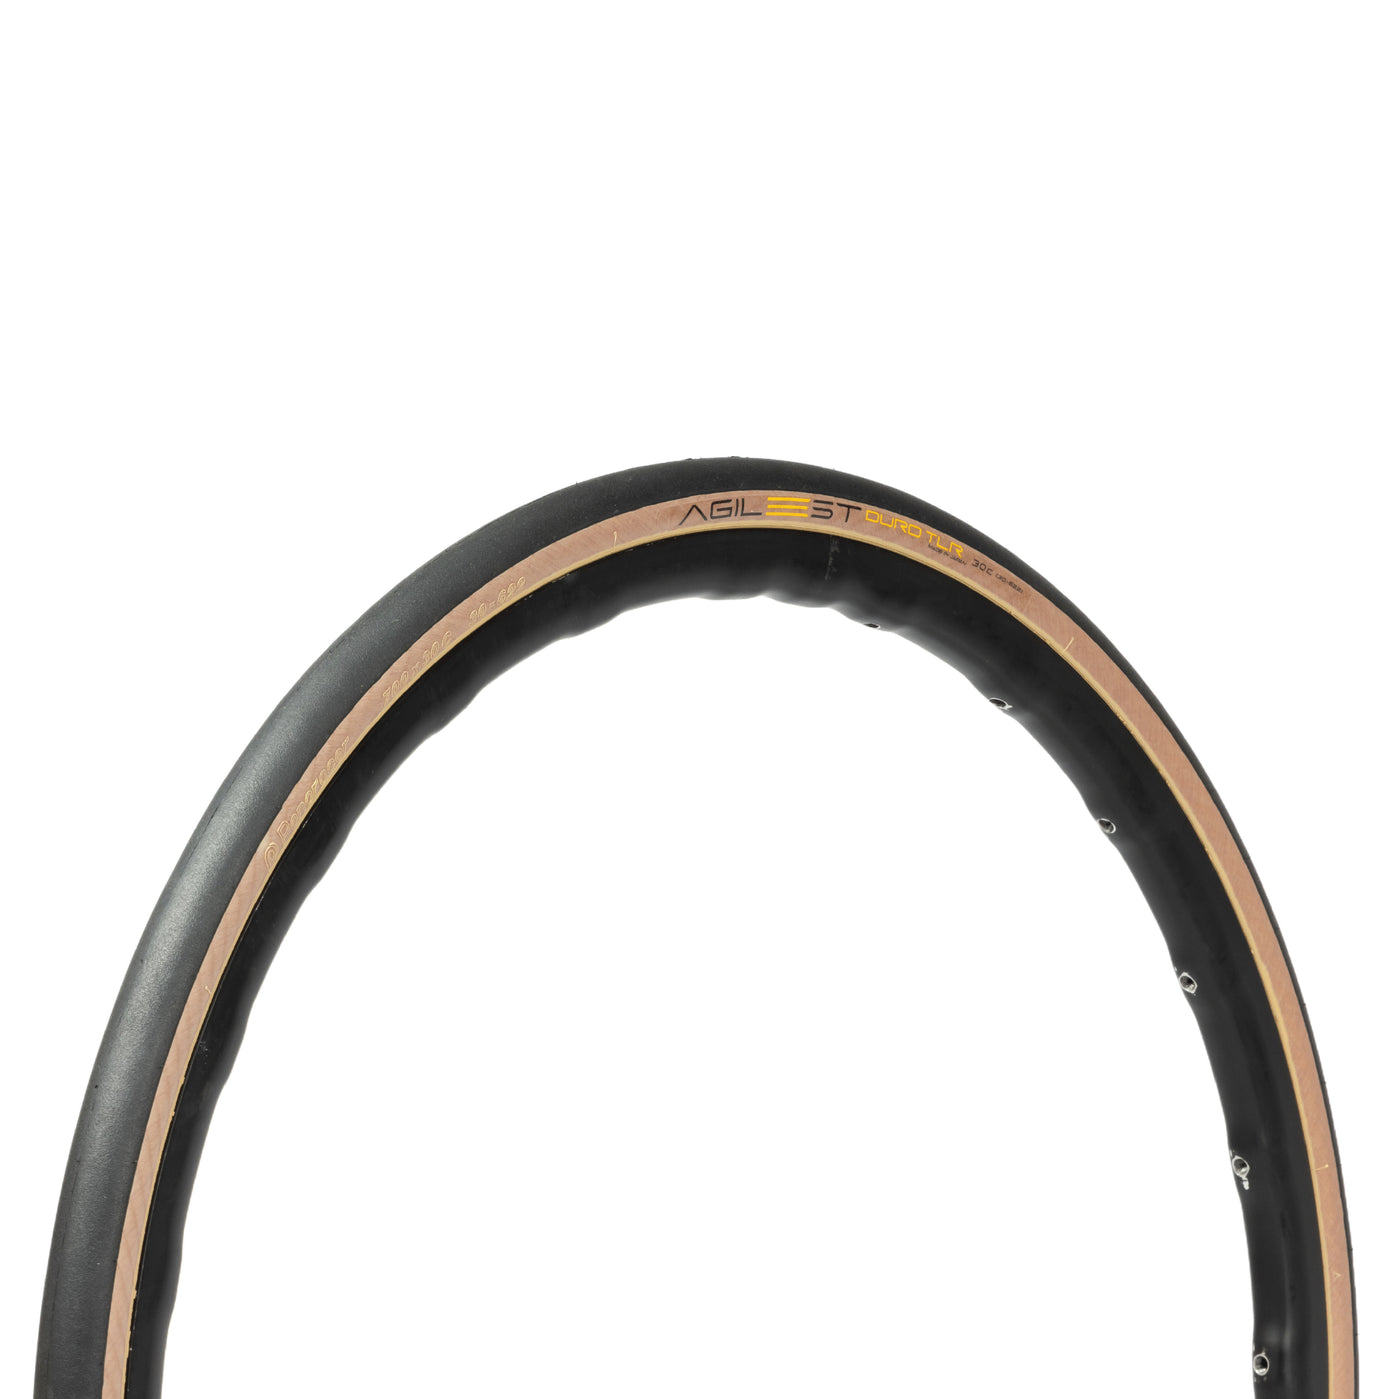 Agilest Duro TLR Folding Road Tire